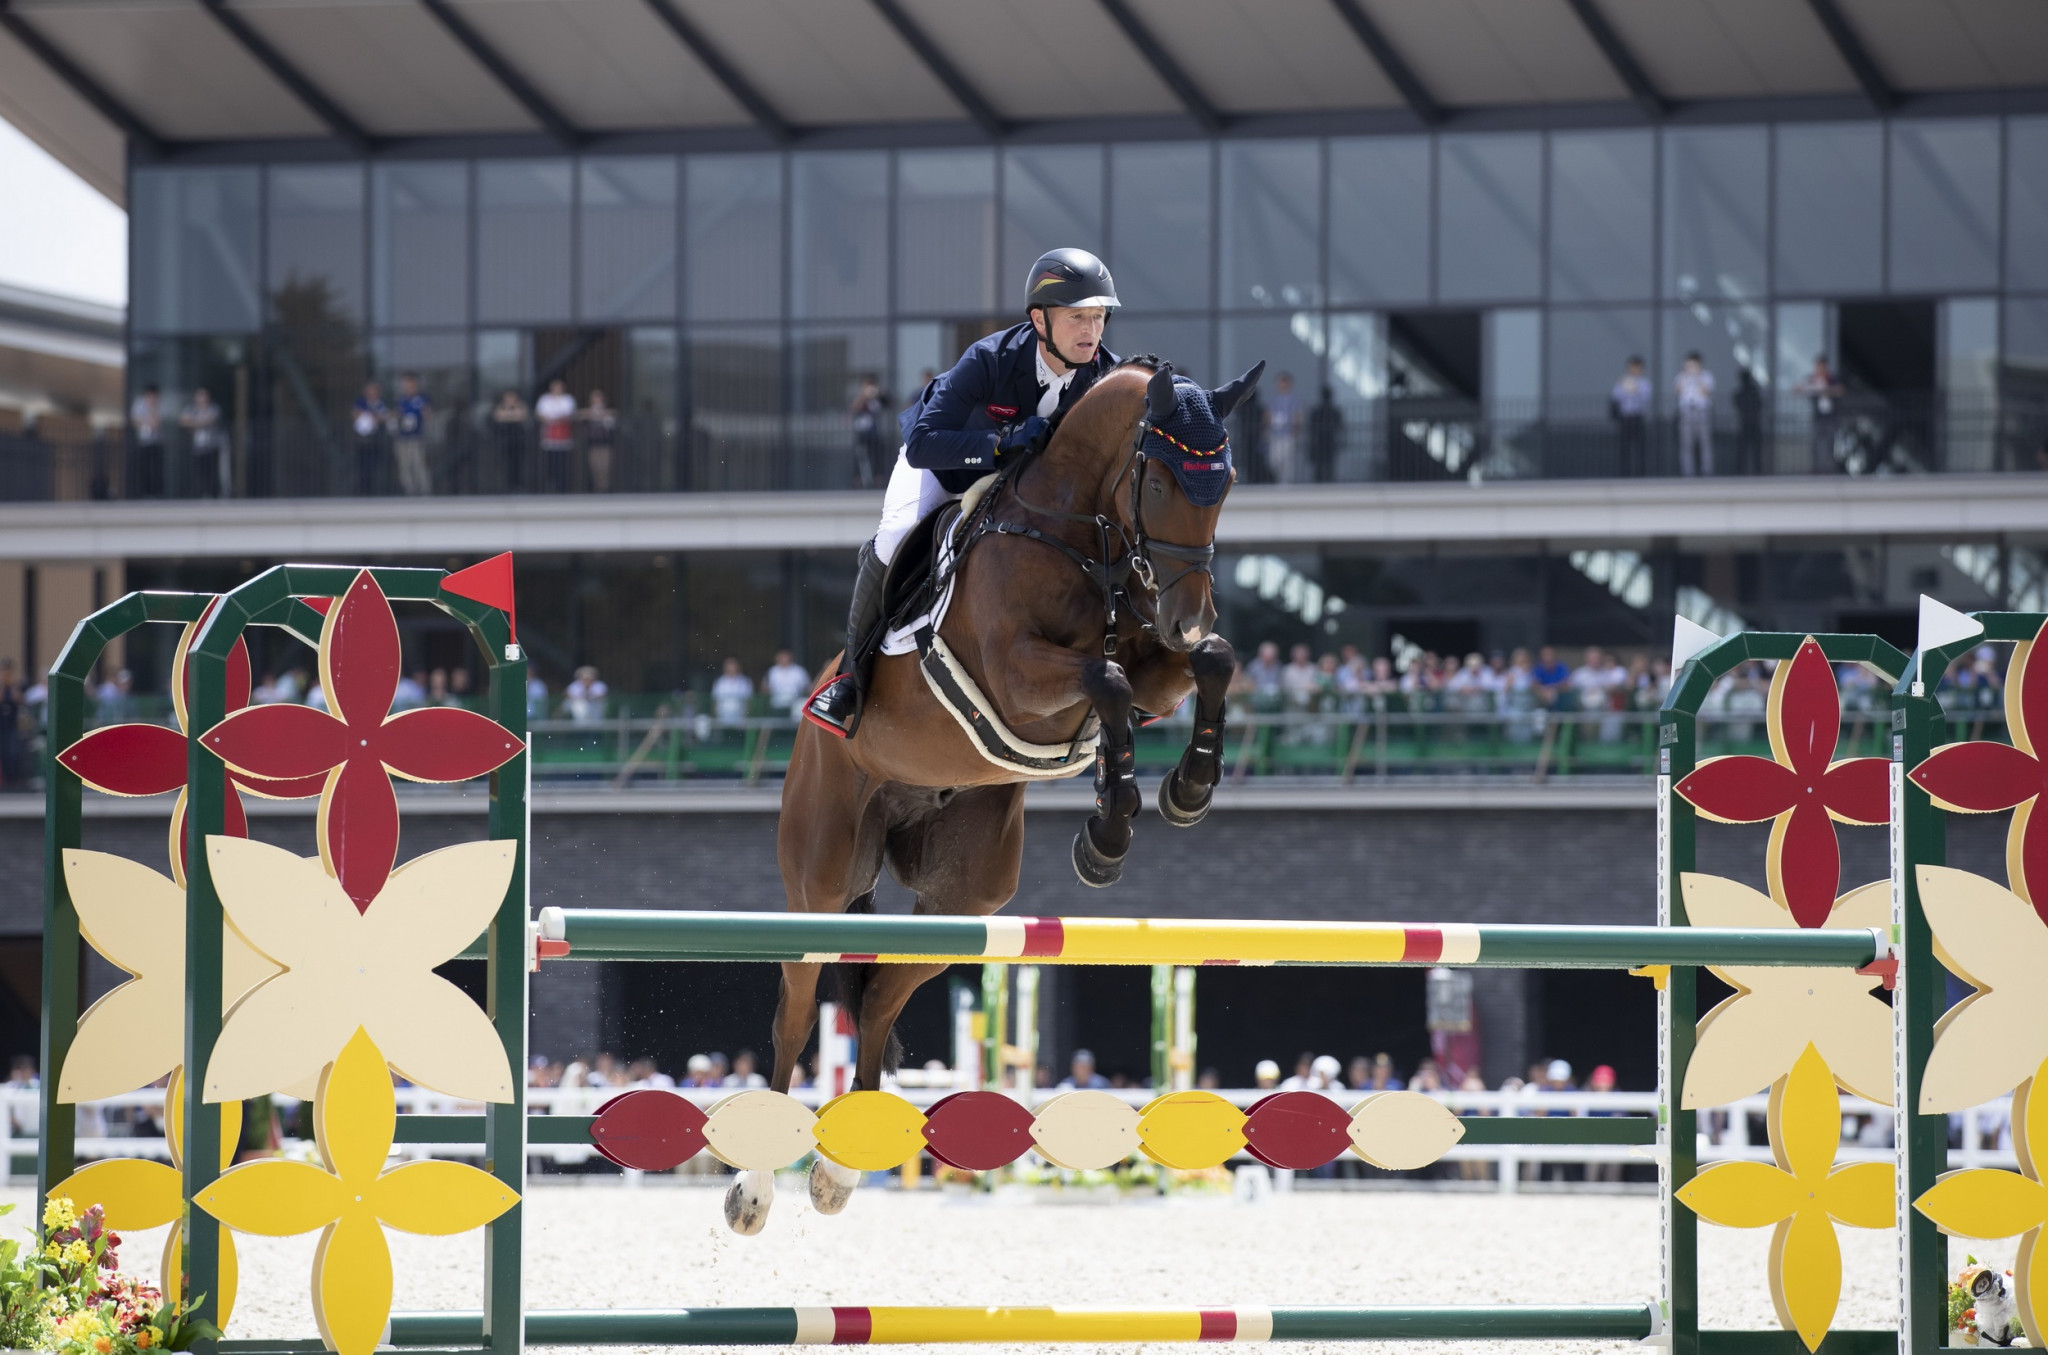 Olympic champion Jung triumphs at Tokyo 2020 eventing test event as FEI praise venue